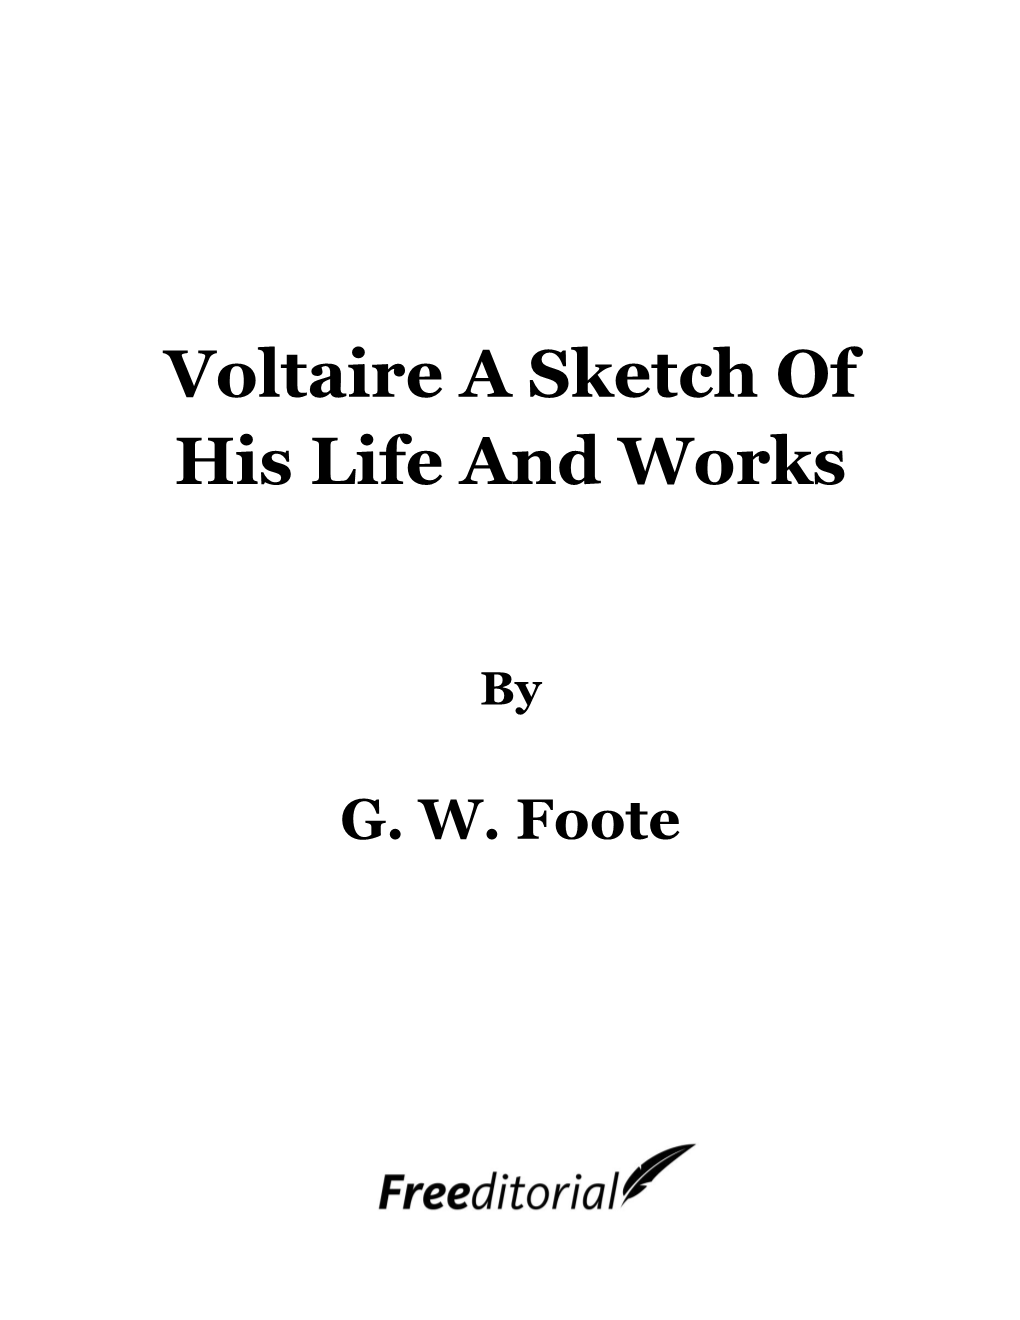 Voltaire a Sketch of His Life and Works